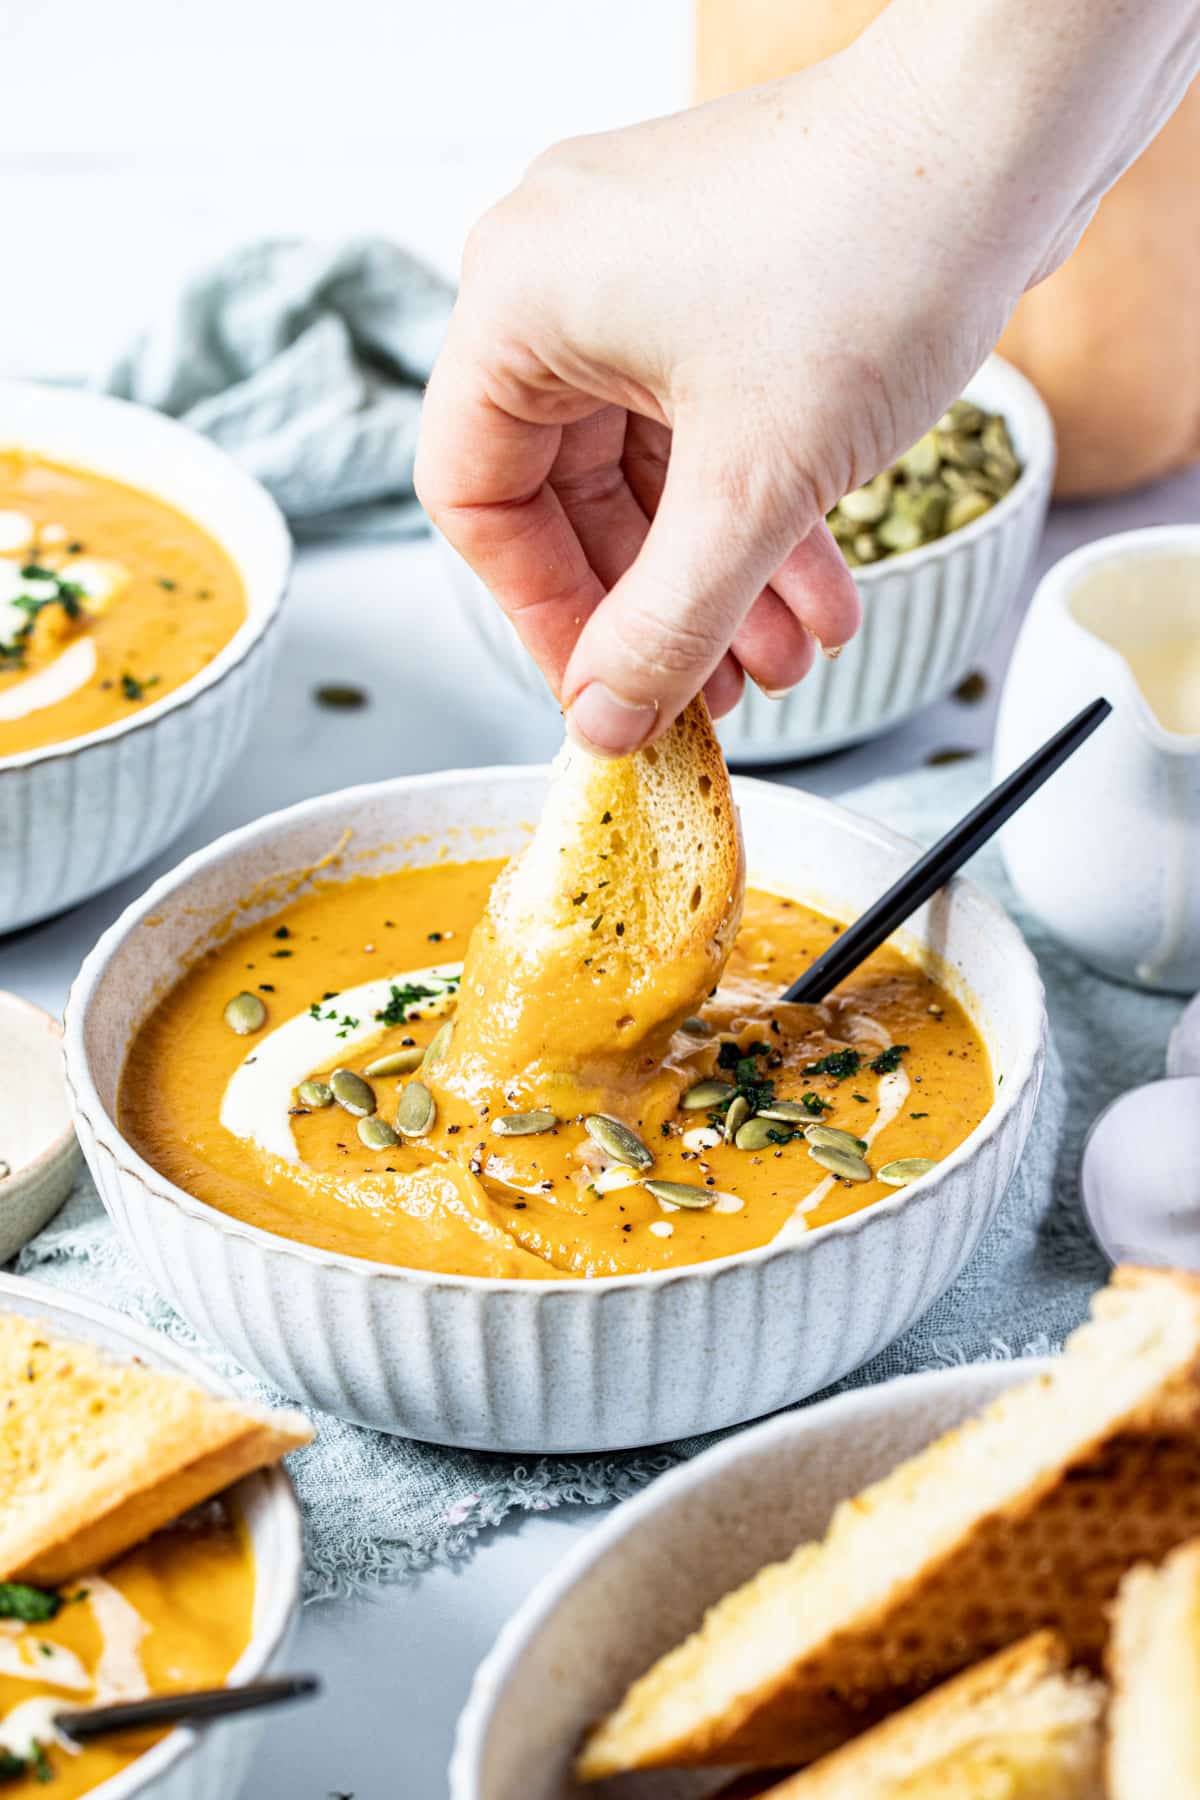 a hand dipping bread into a bowl of soup.